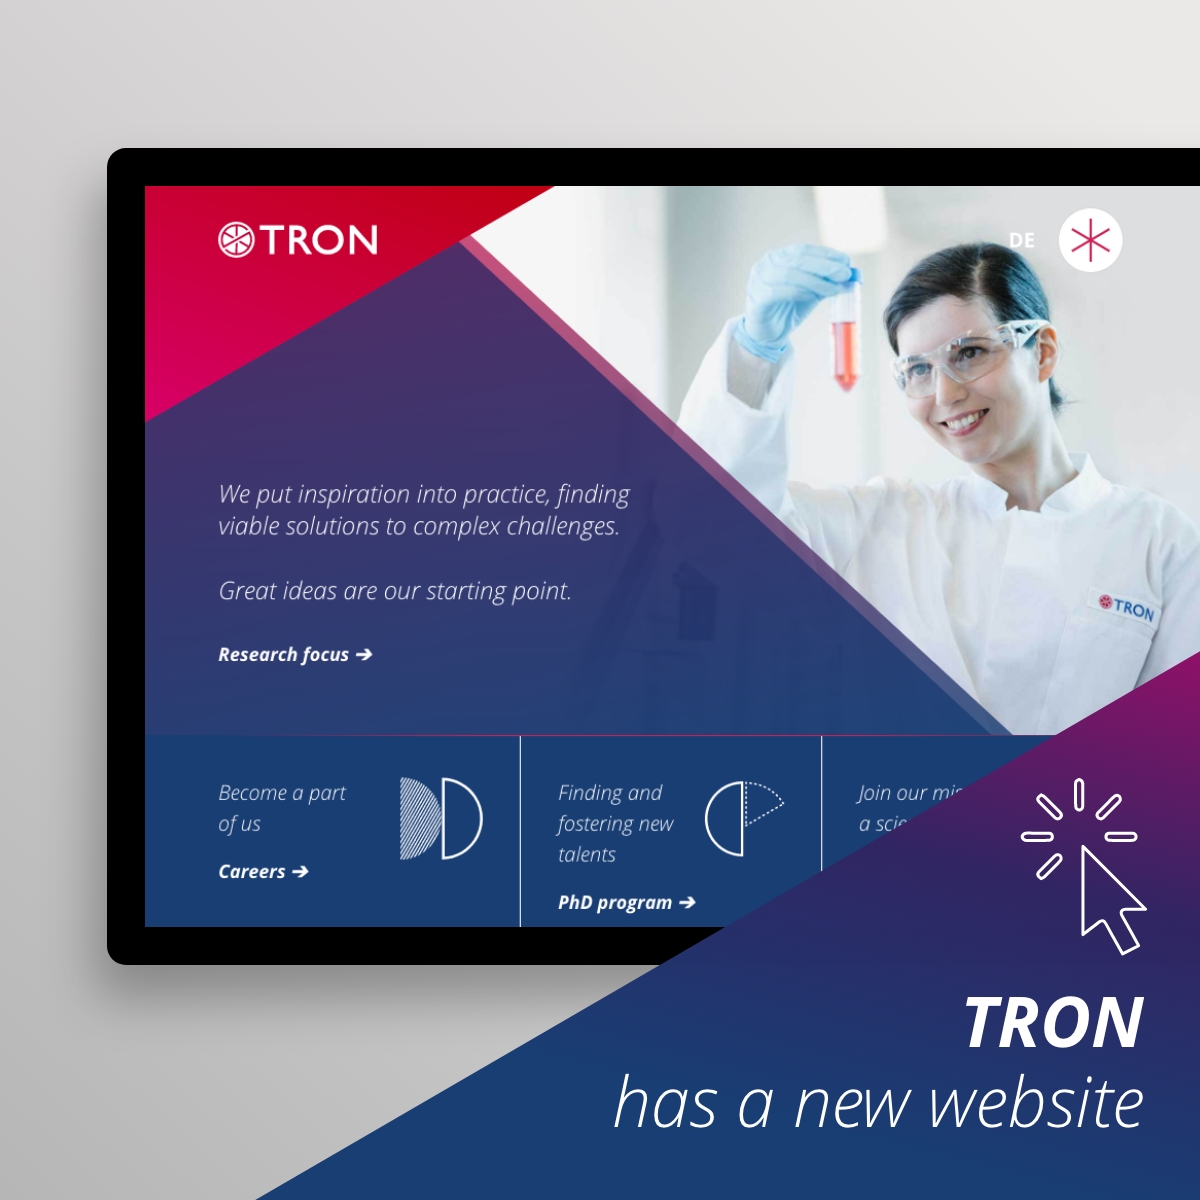 Great ideas are our starting point to target further challenges 🚀 We proudly present our new #website created in close collaboration with labor.digital Take a look and explore our new site! ▶️ tron-mainz.de #TRONMainz #website